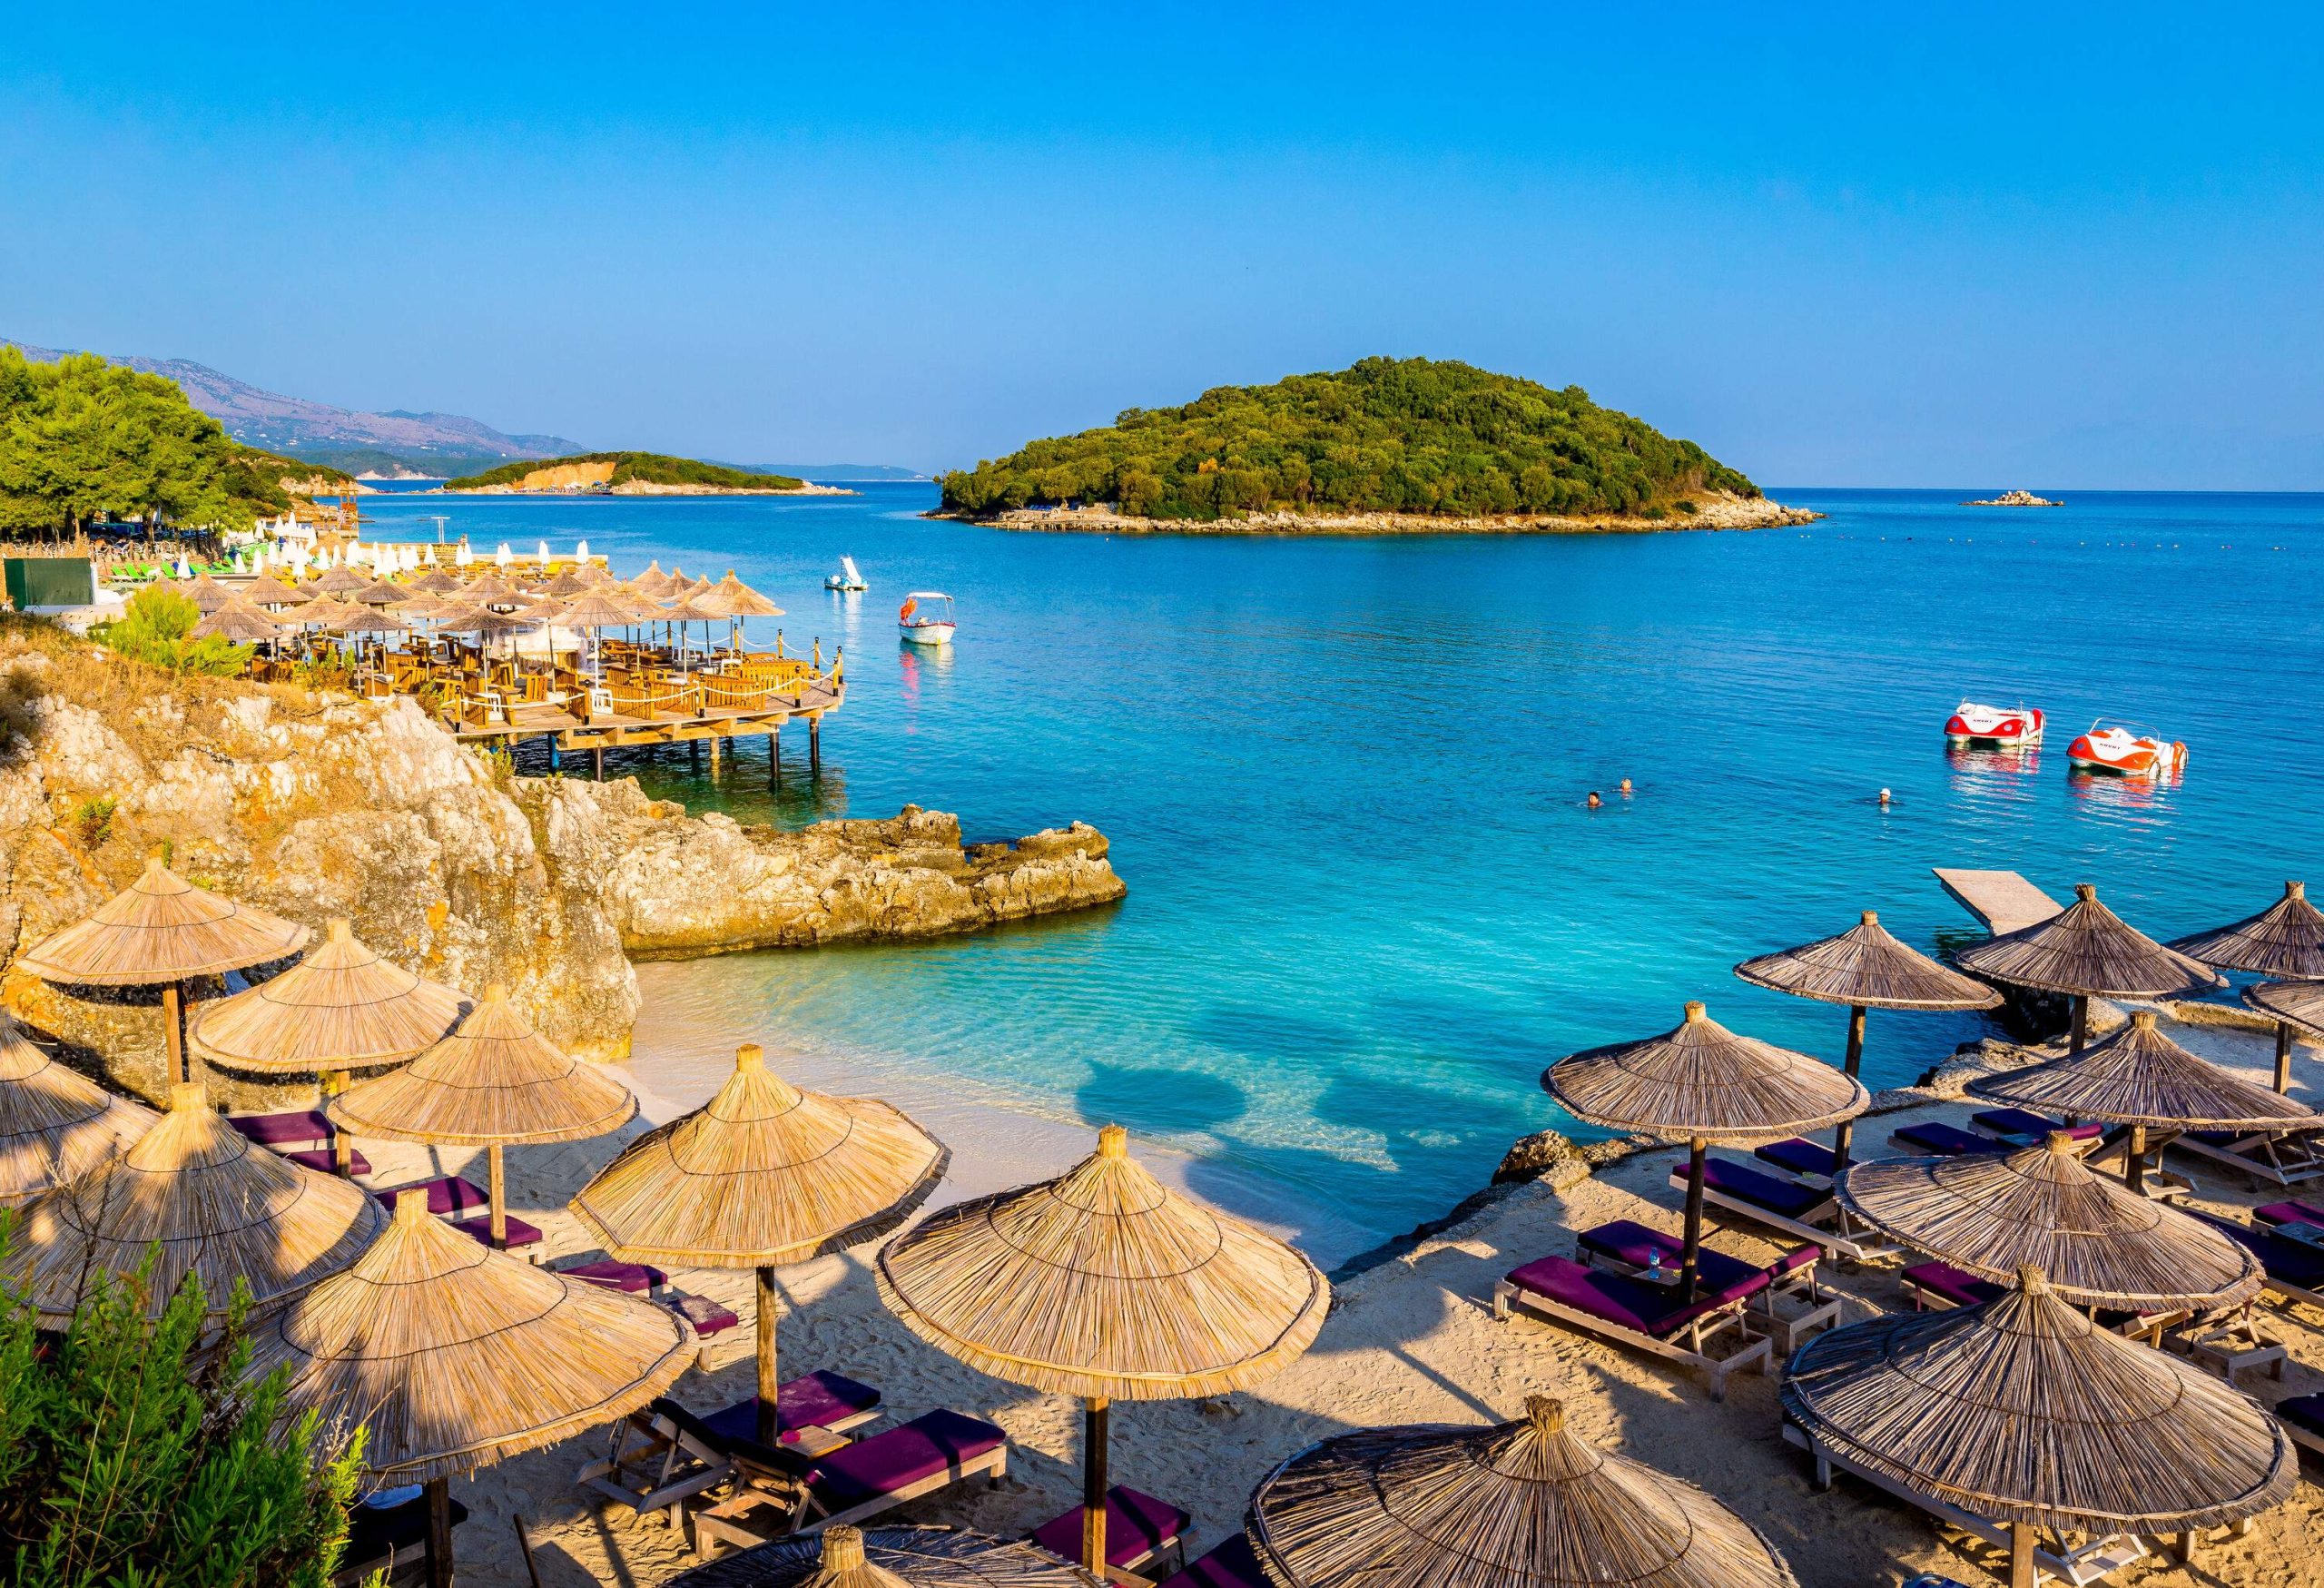 Picturesque view of a luxury beach resort with thatch umbrellas, deckchairs and boats.